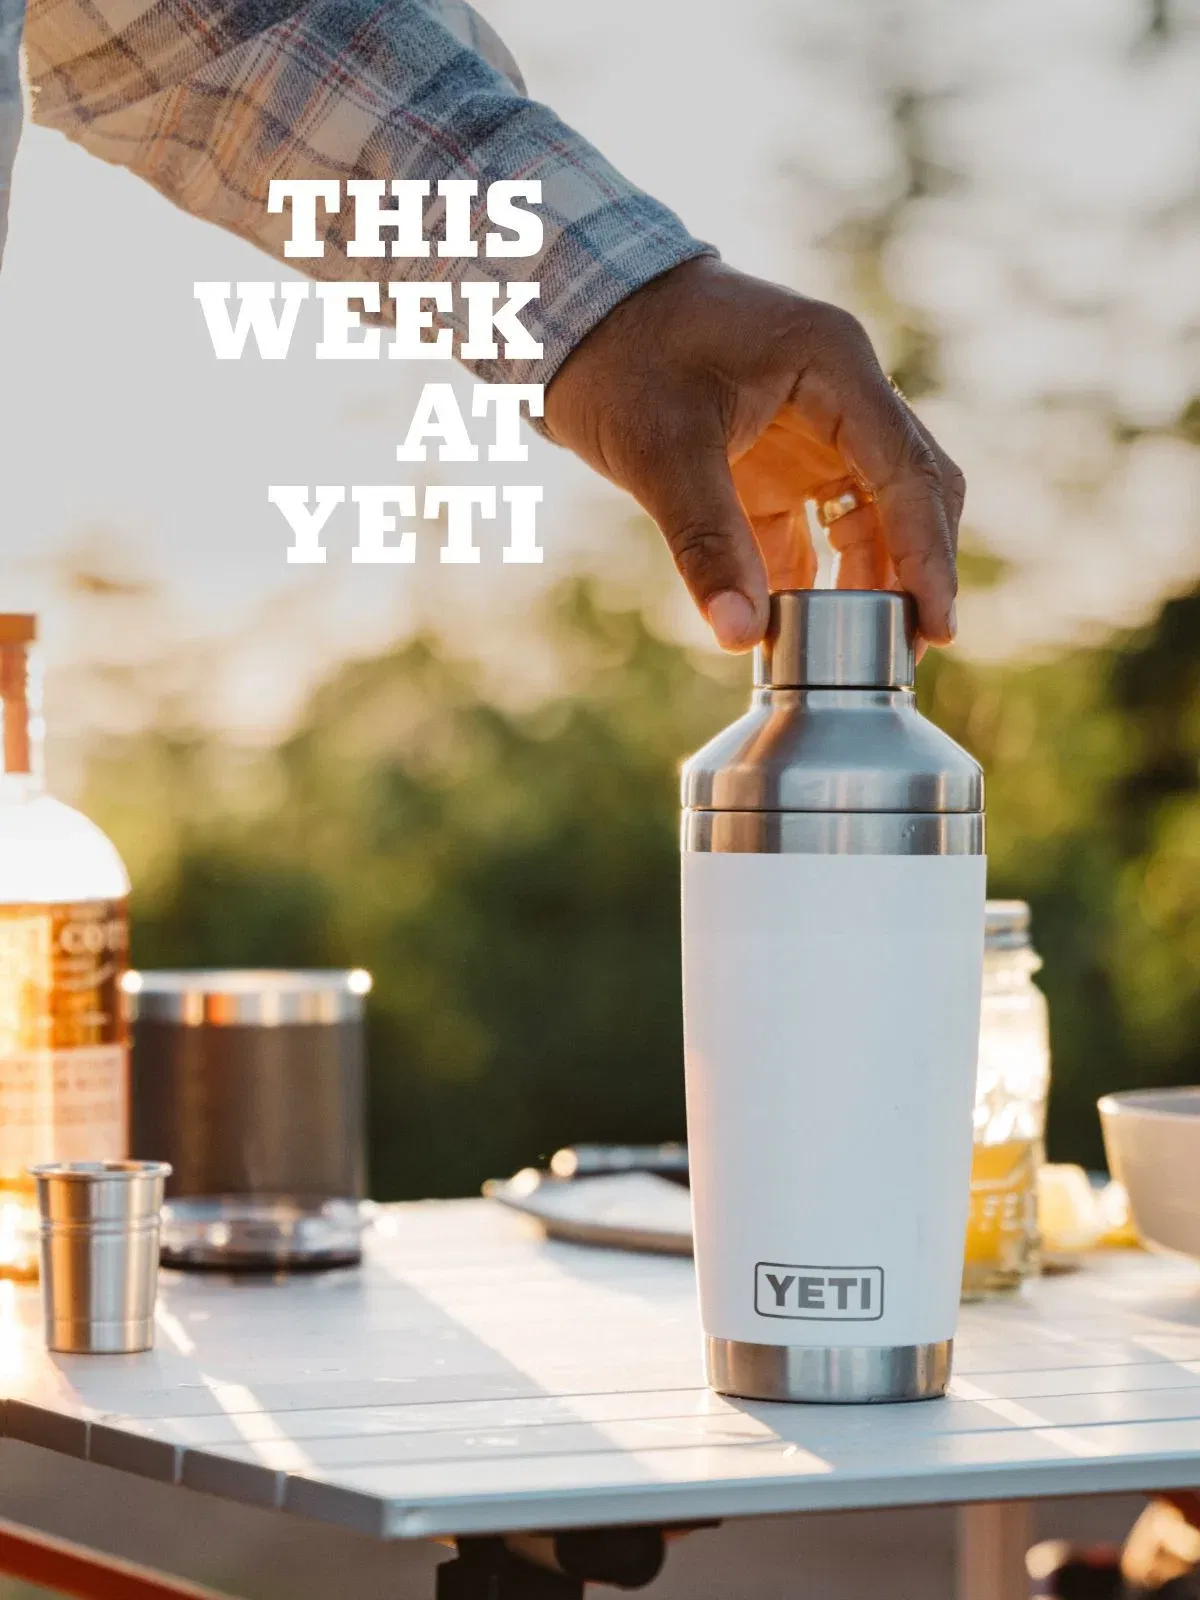 Yeti just launched a new cocktail shaker